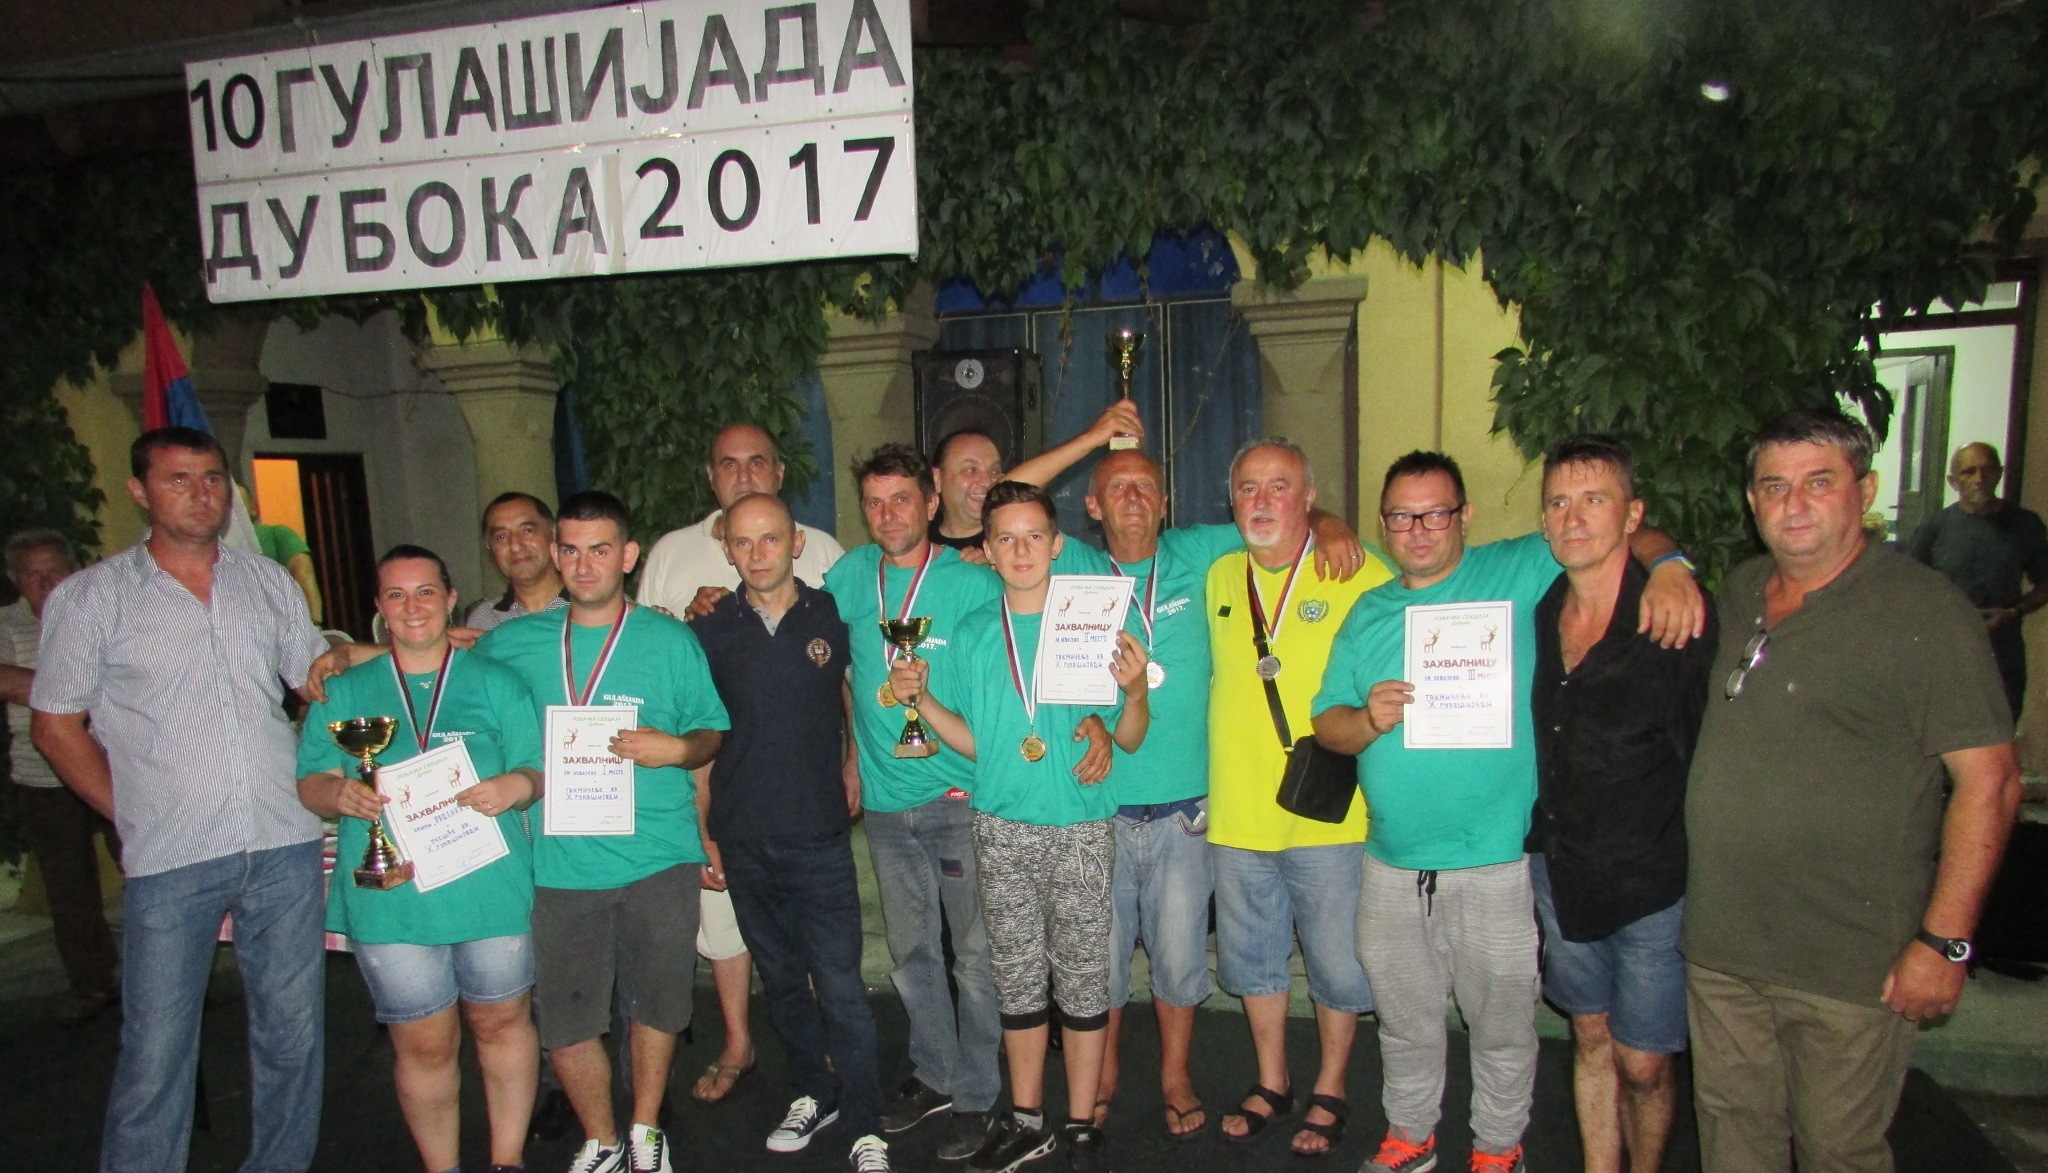 Read more about the article Одржана 10. Гулашијада у Дубоки – ала каква!!!